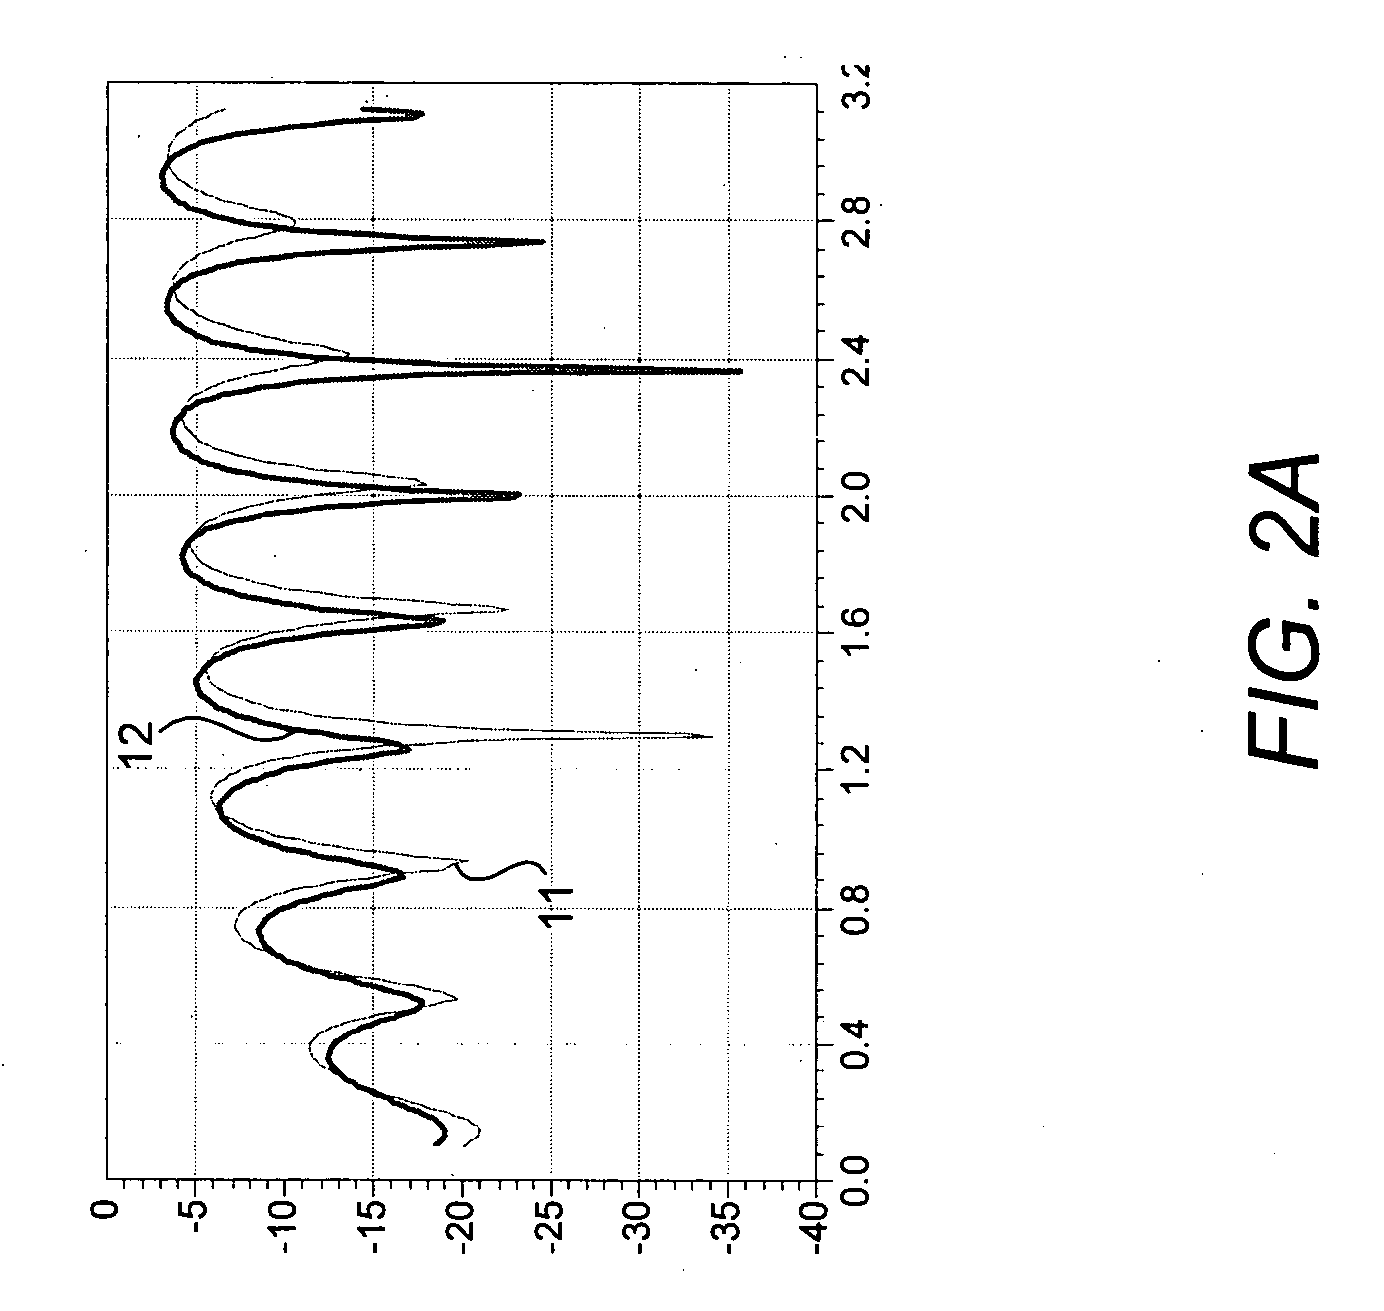 Method and apparatus for determining one or more s-parameters associated with a device under test (DUT)